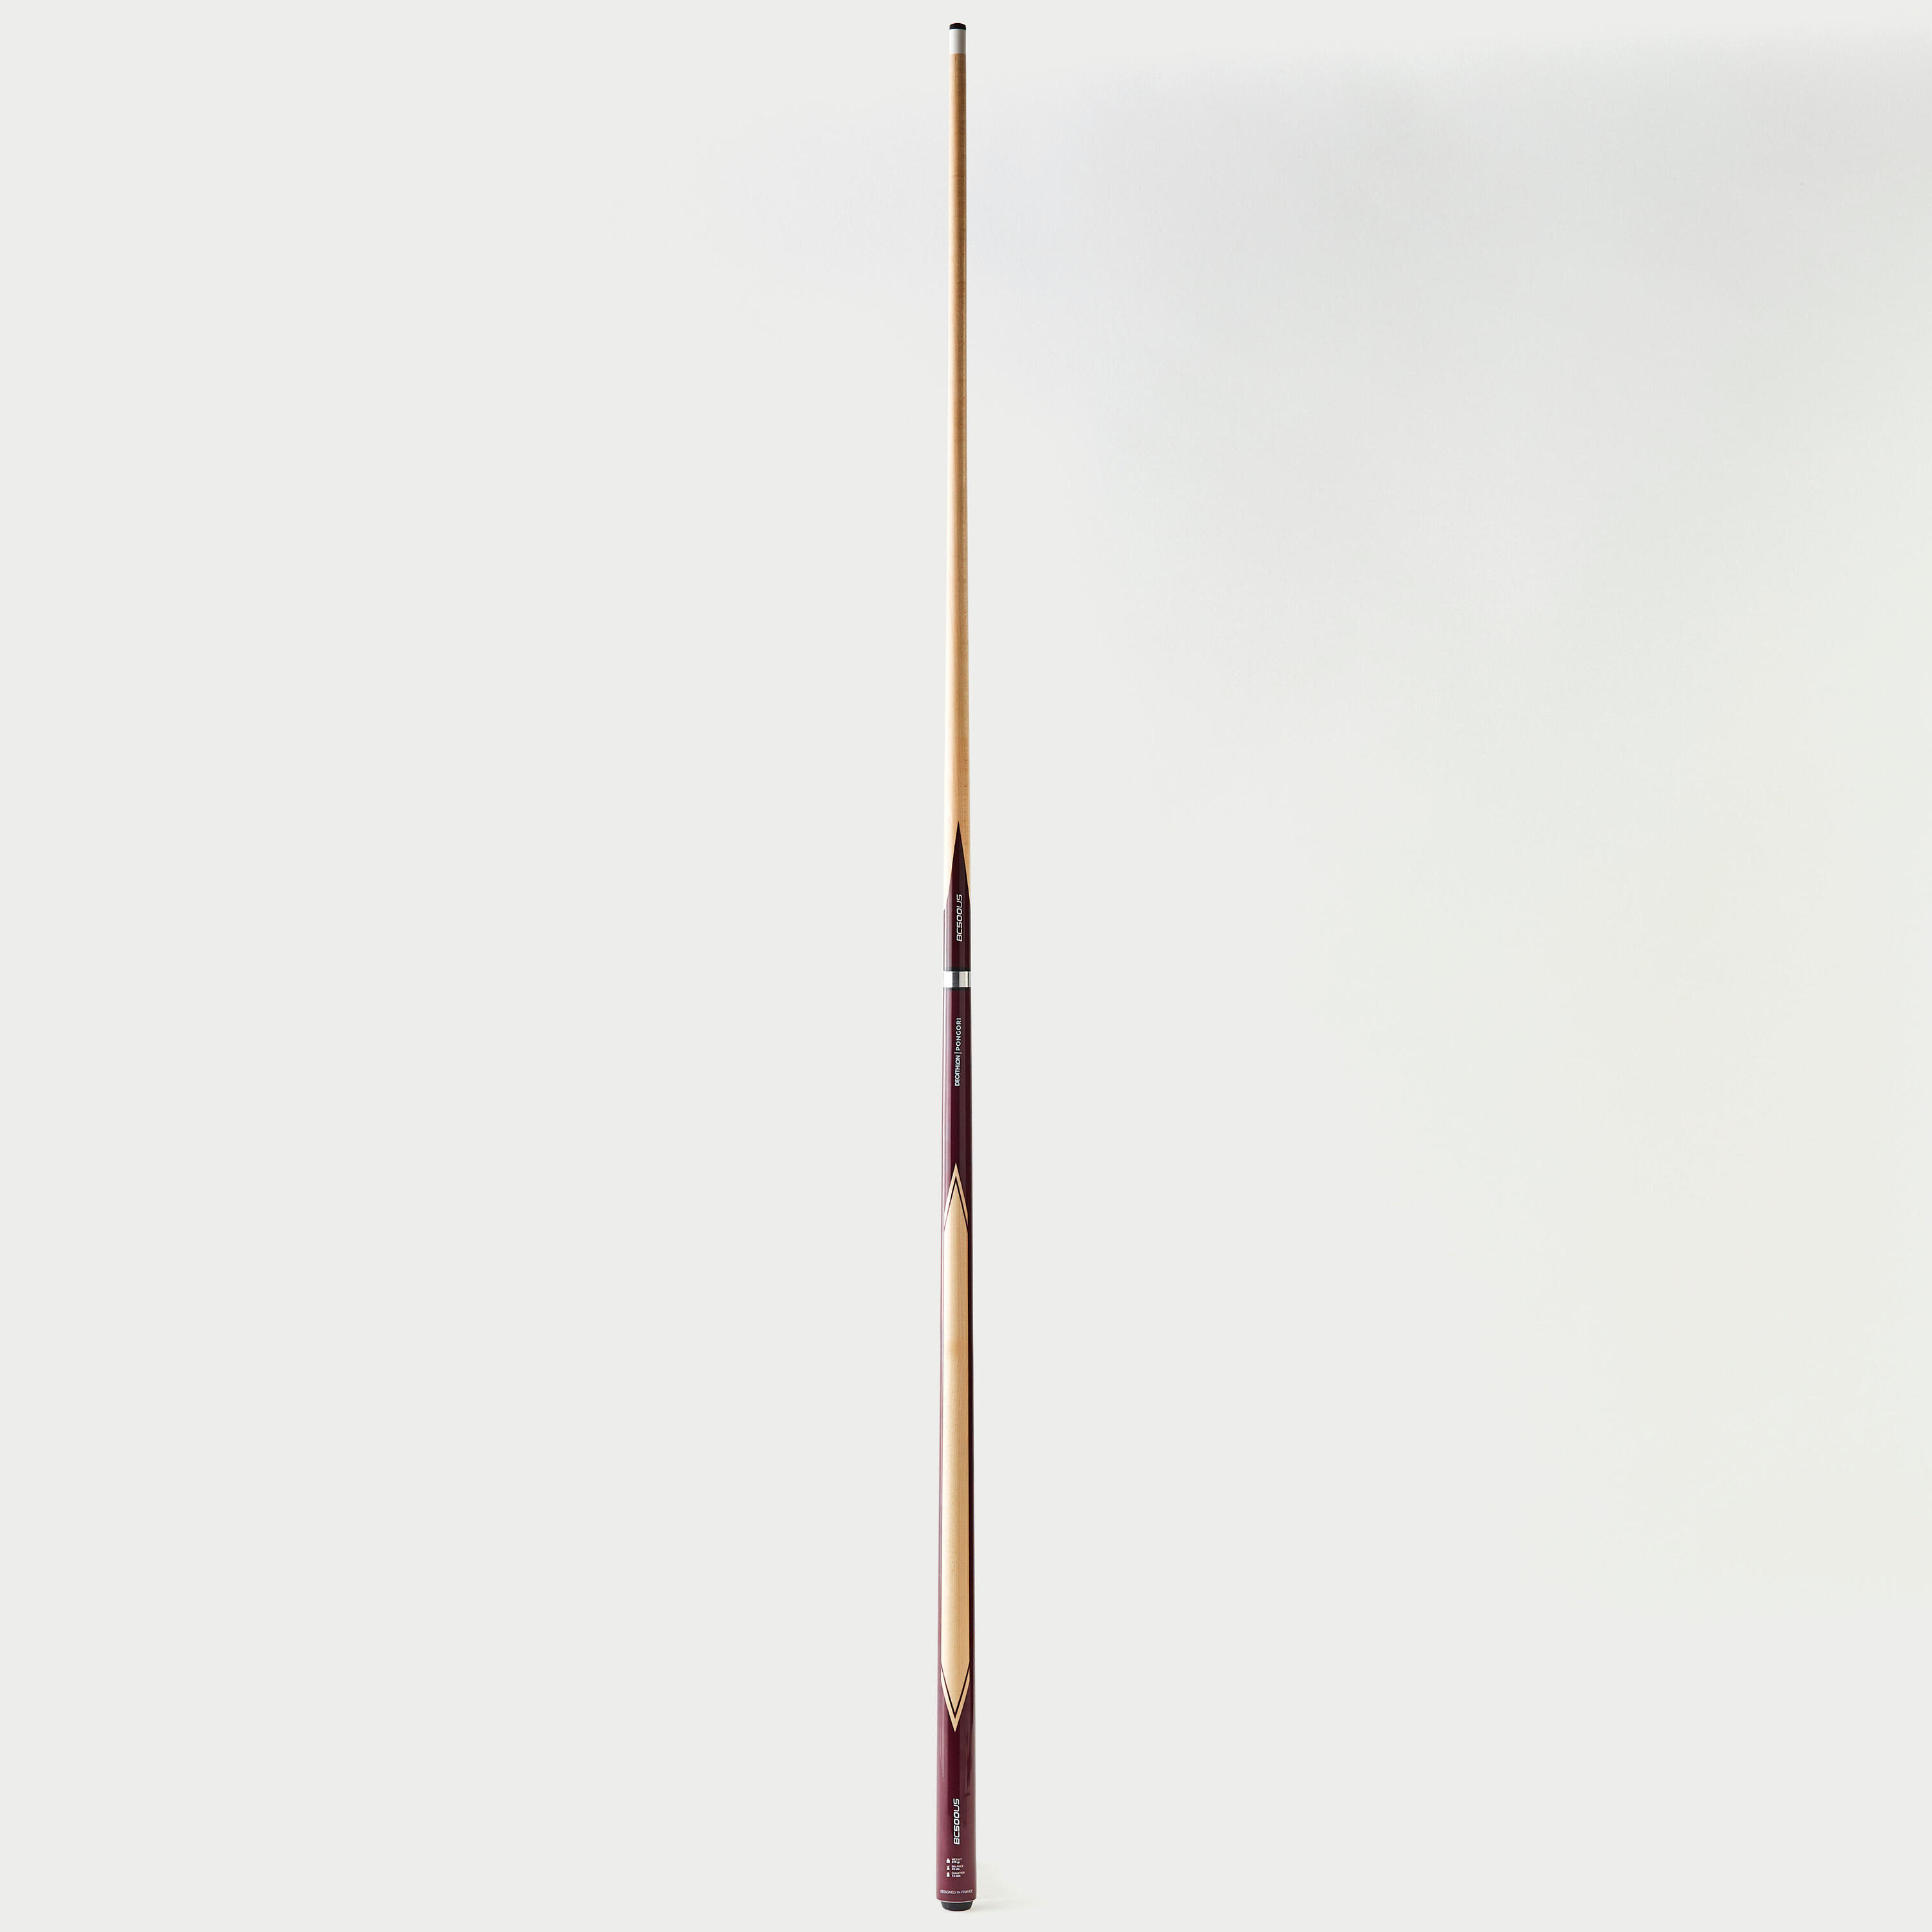 Two-Piece Half-Jointed 13 mm Pool Cue BC 500 US 2/8